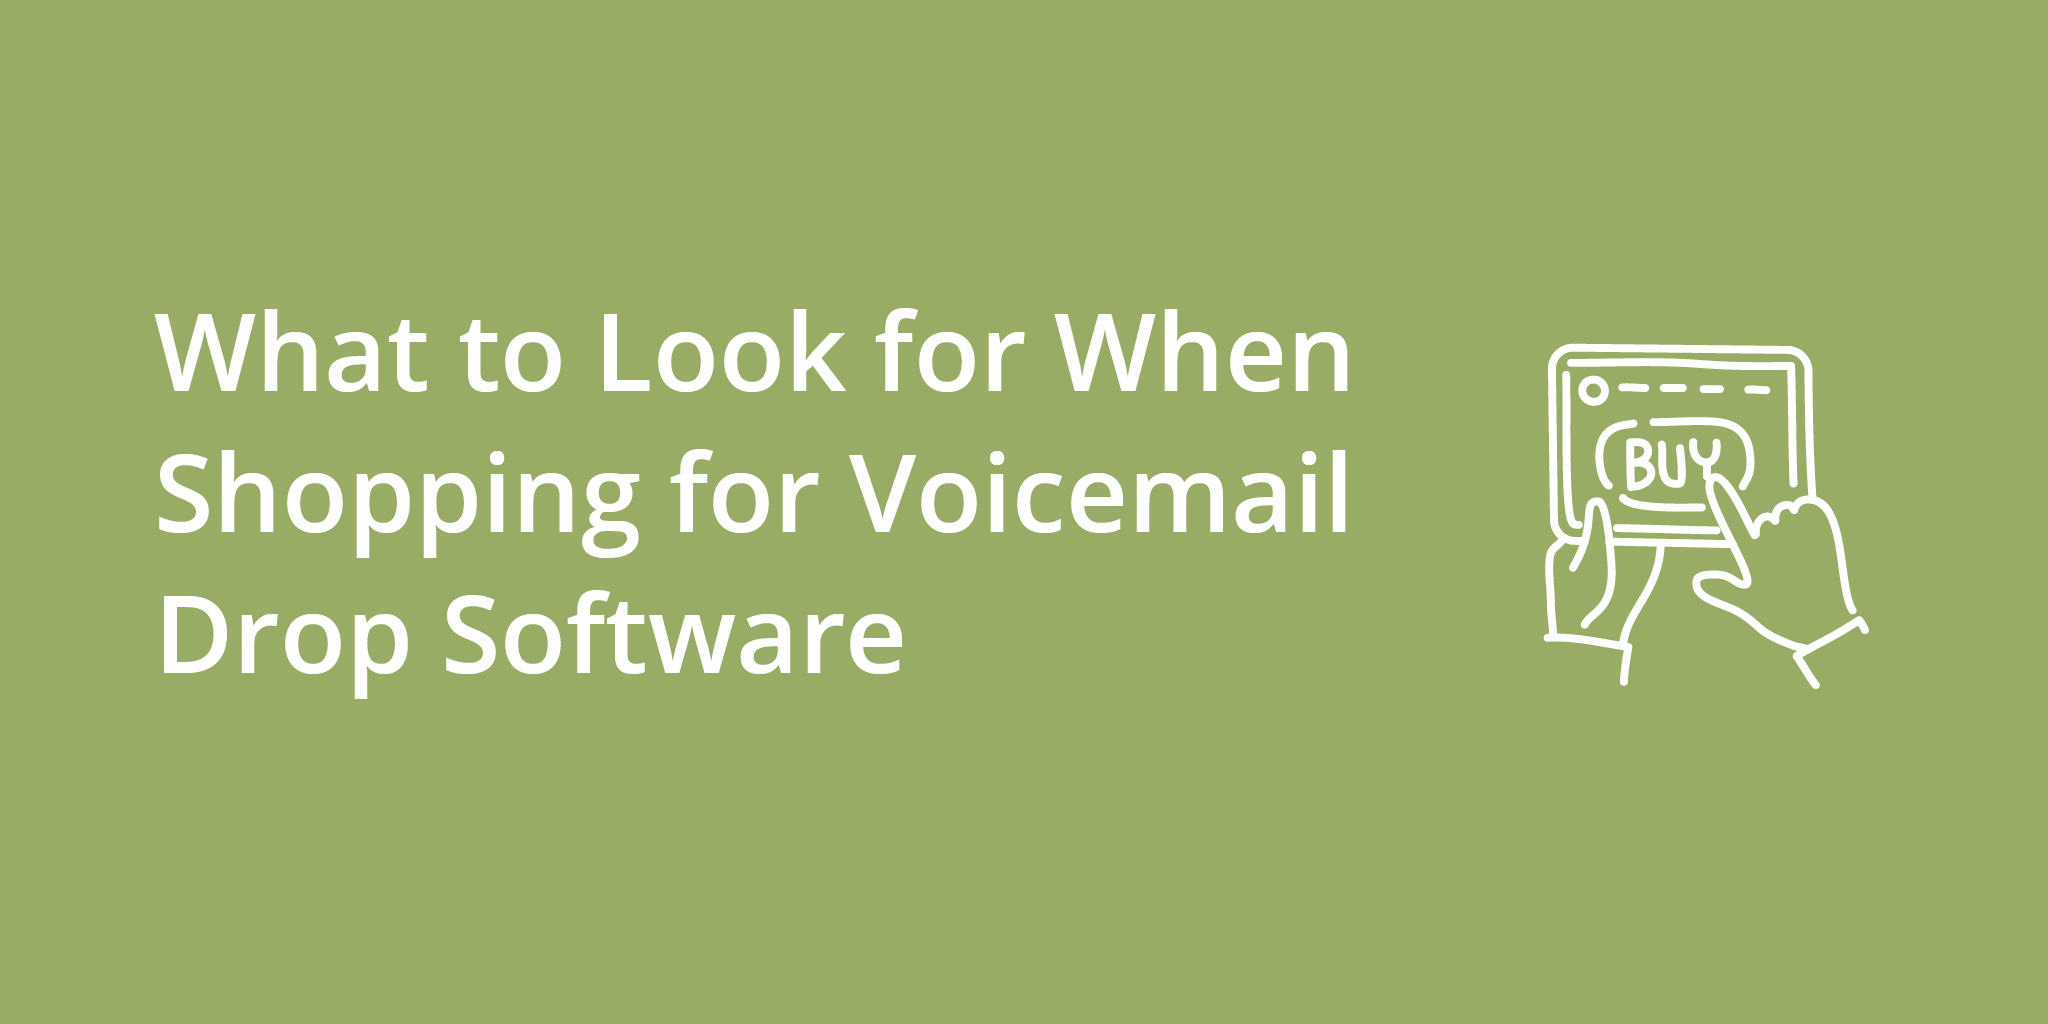 /assets/img/uploads/articles/what-to-look-for-when-shopping-for-voicemail-drop-software_sales-cadence-blog-header.png